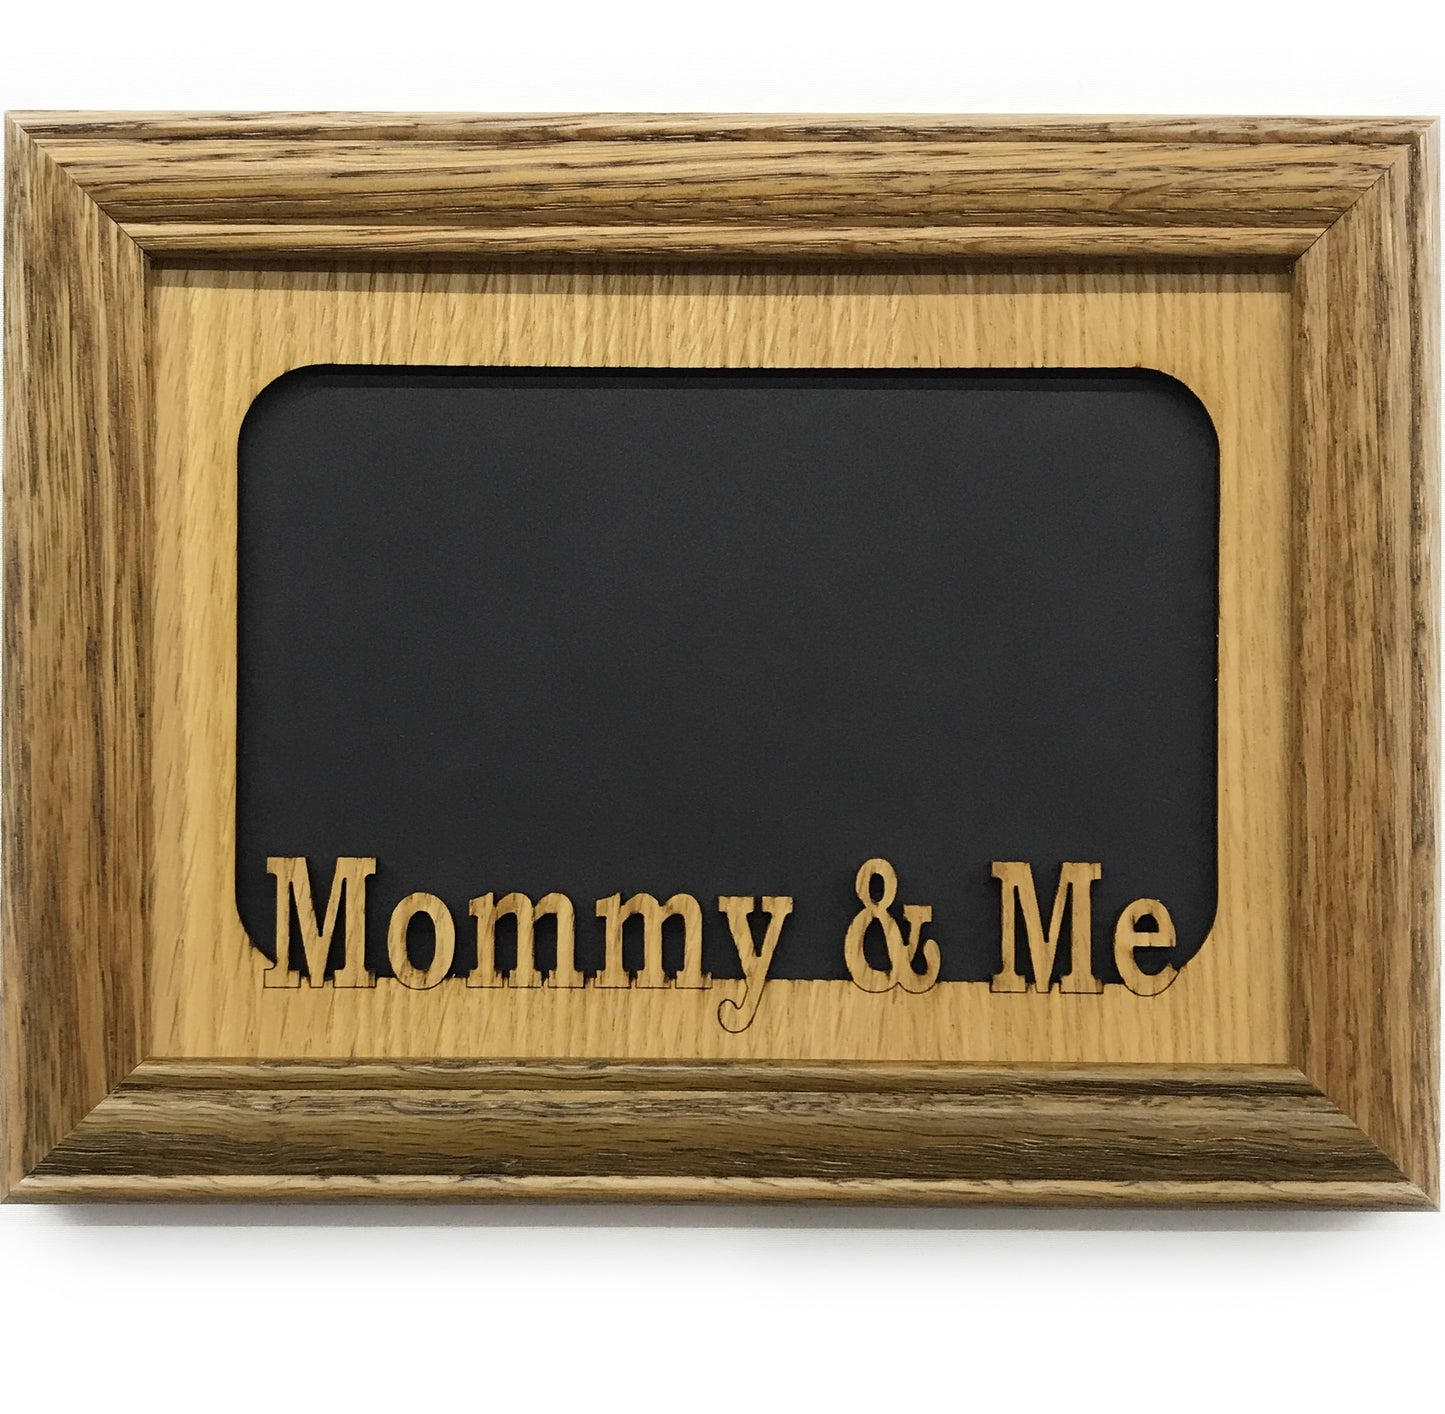 Mommy & Me Picture Frame - 5x7 Frame Hold 4x6 Photo